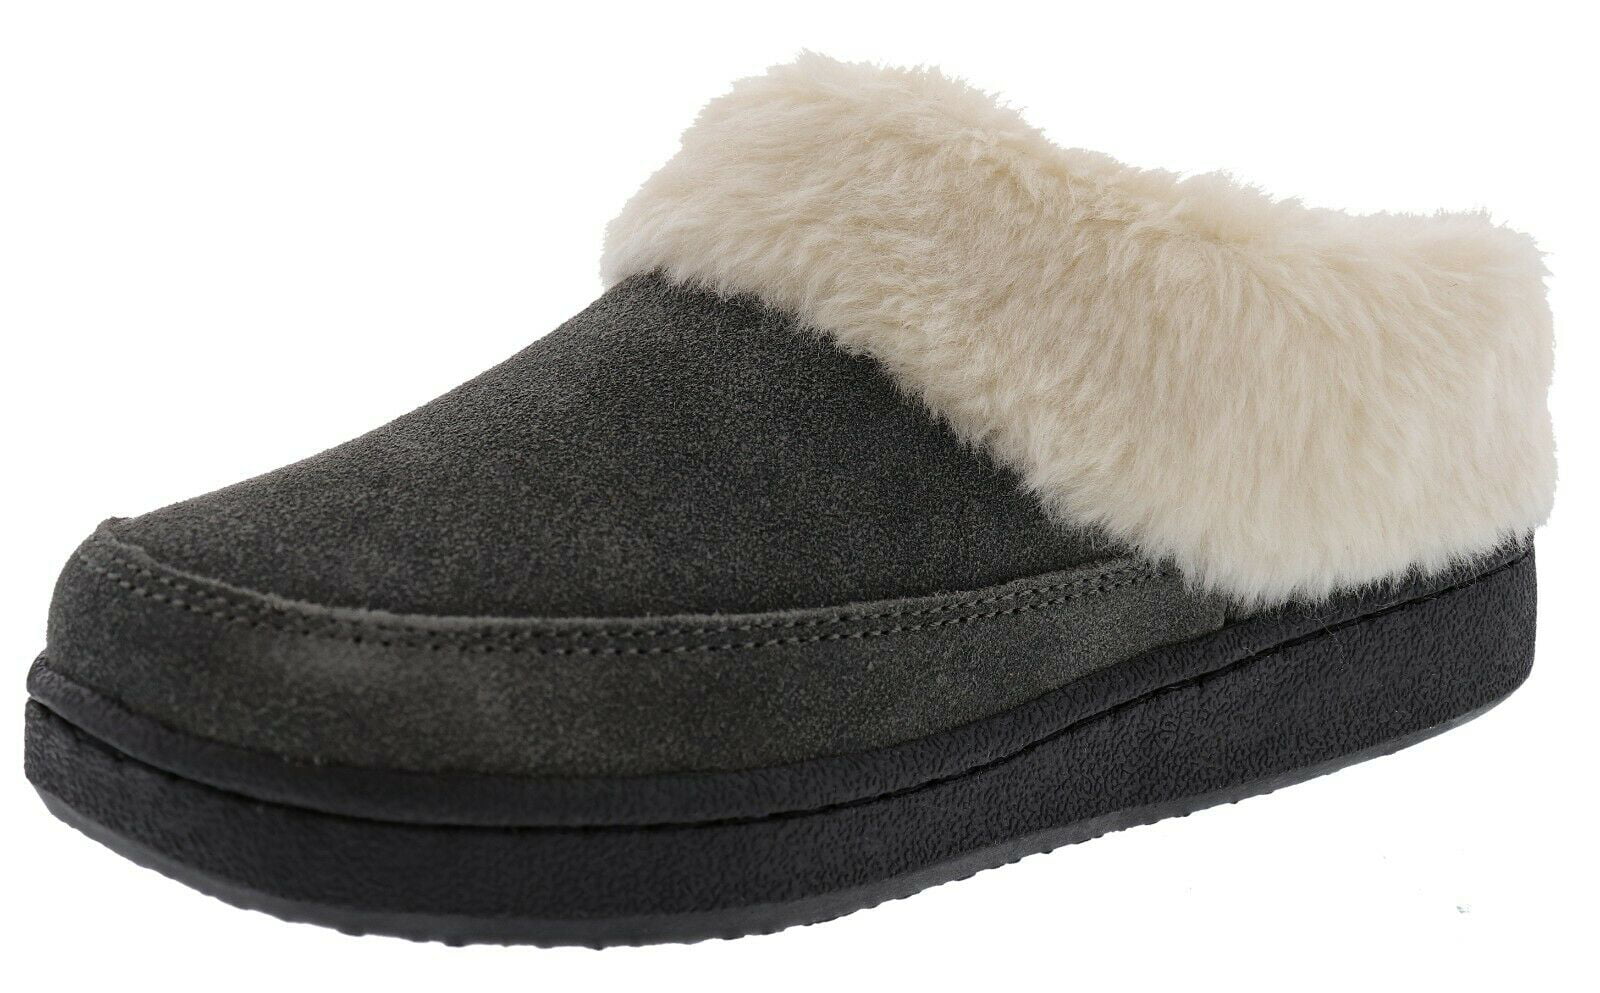 Clarks Womens Faux Fur Lined Clog Slippers Warm Cozy Indoor Outdoor ...